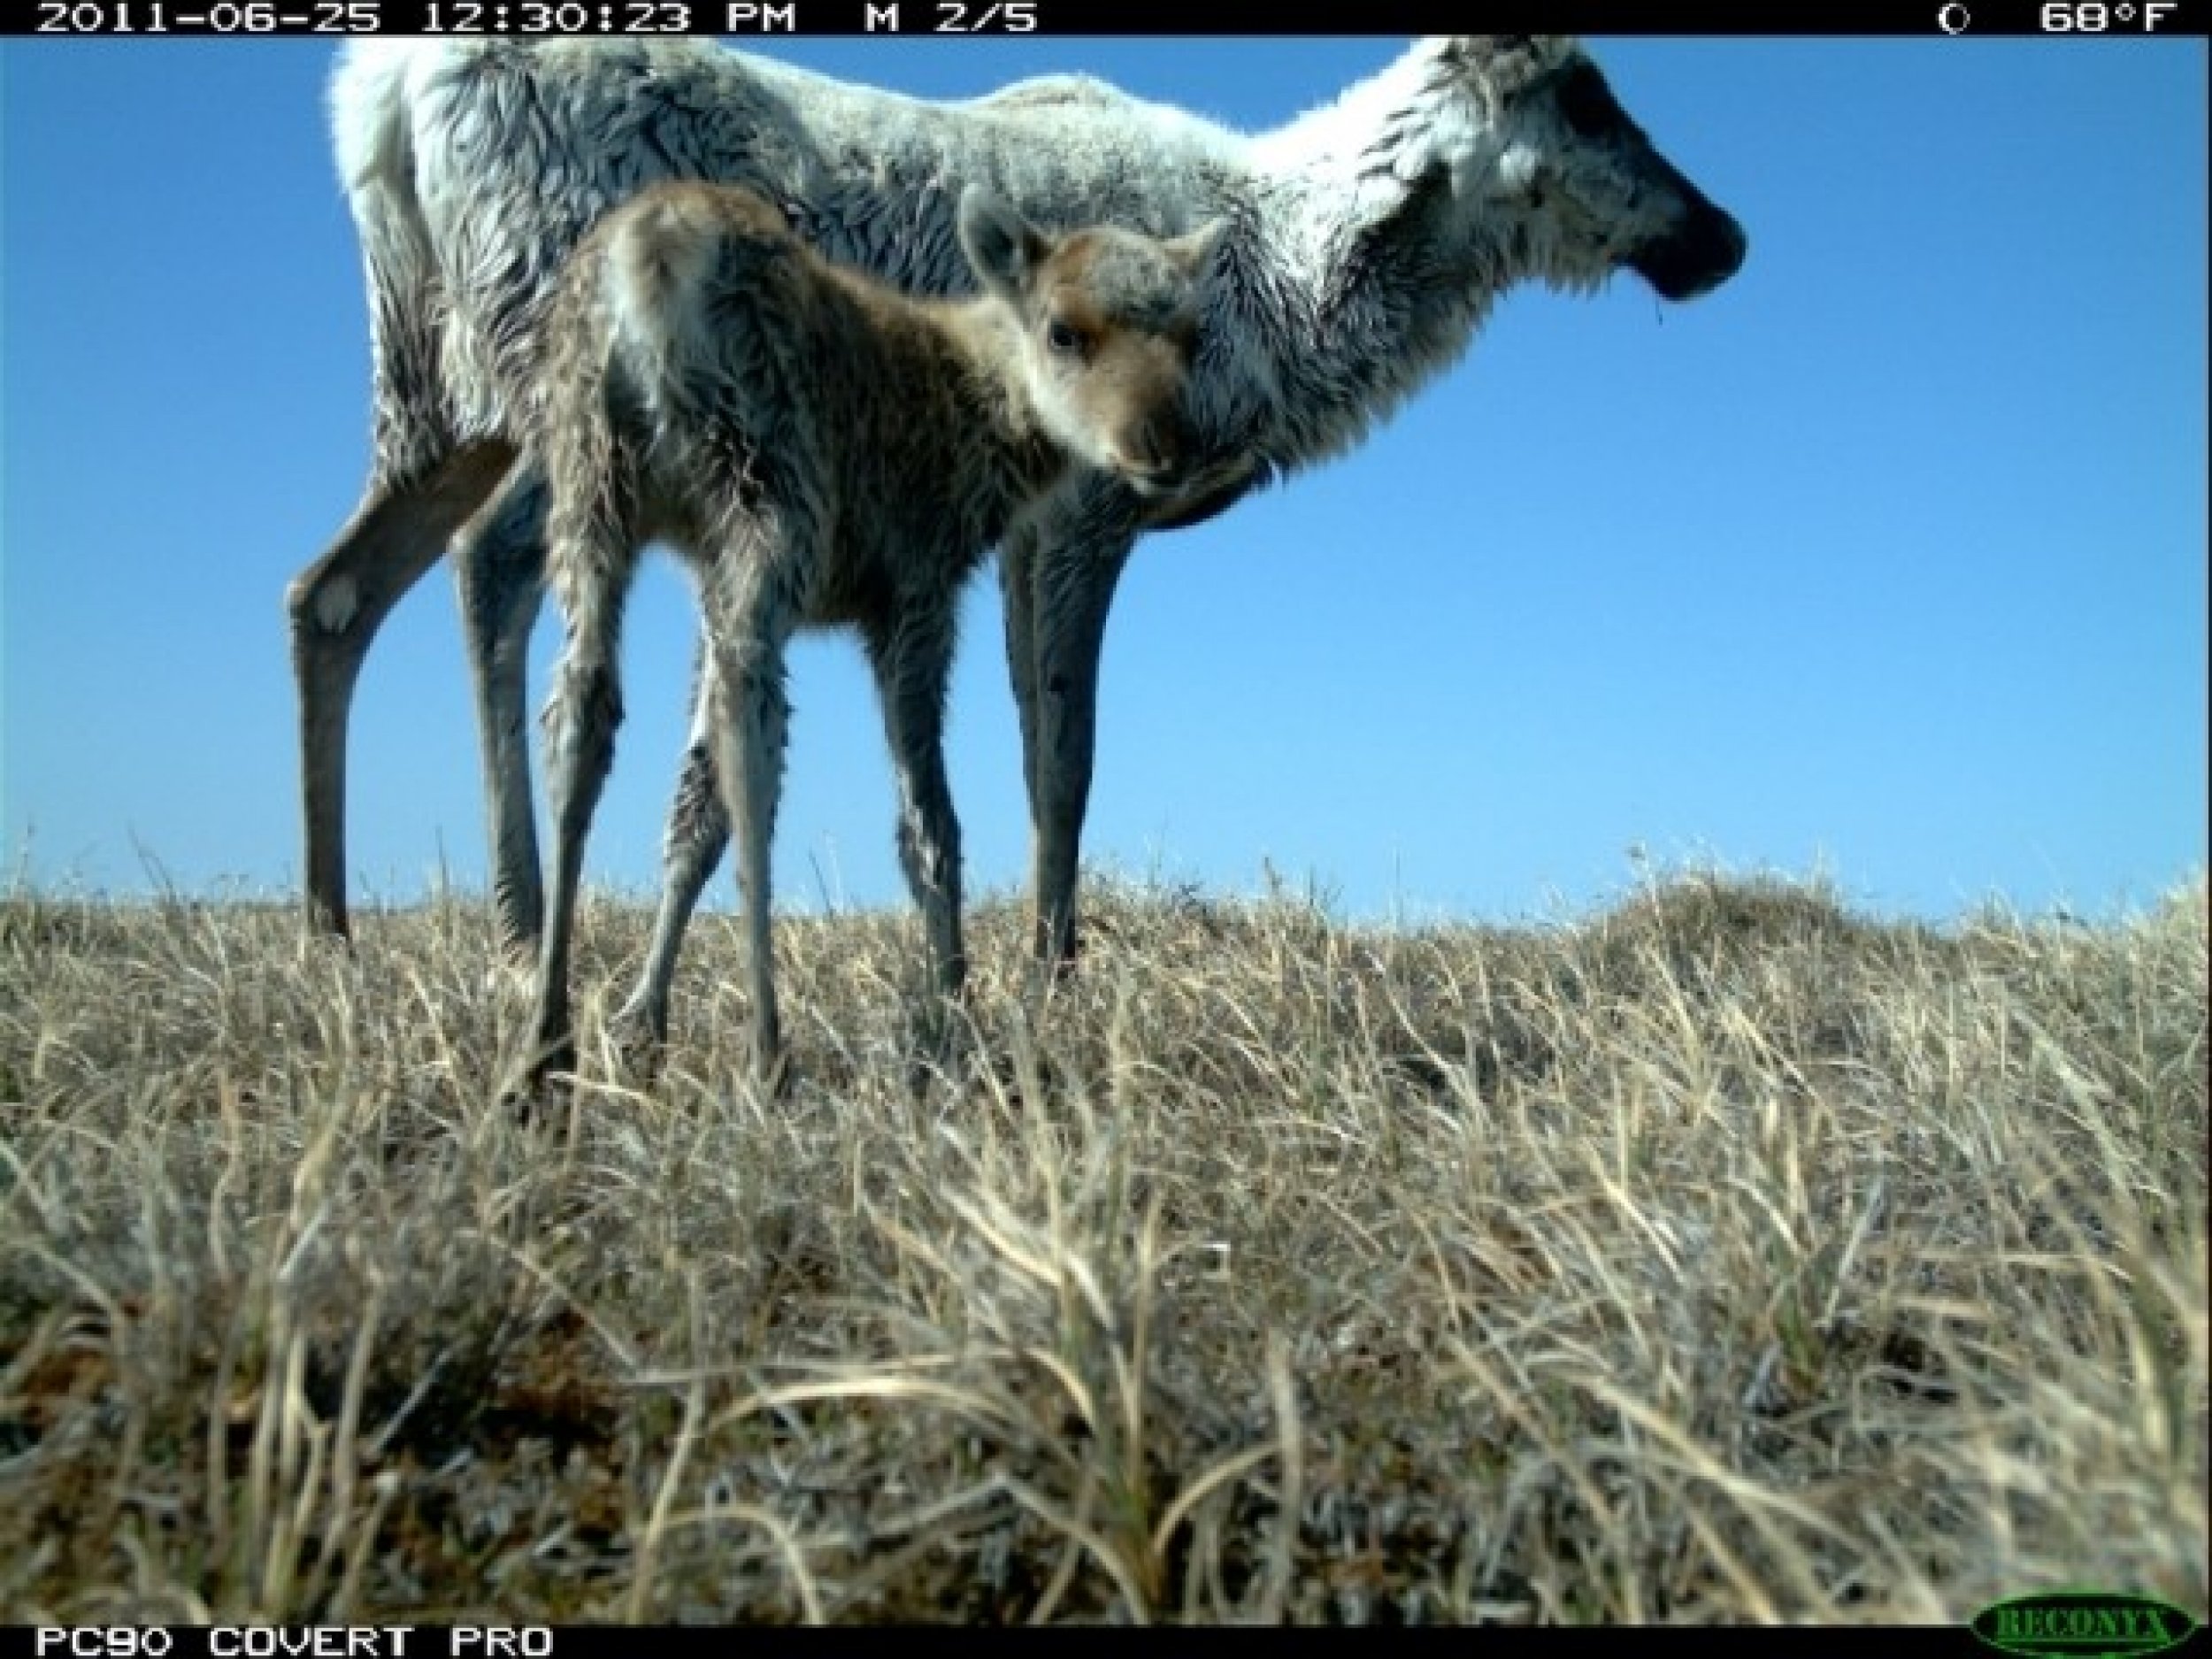 Sometimes, the camera inadvertently captures images of other wildlife in the area including this caribou mother and calf. 